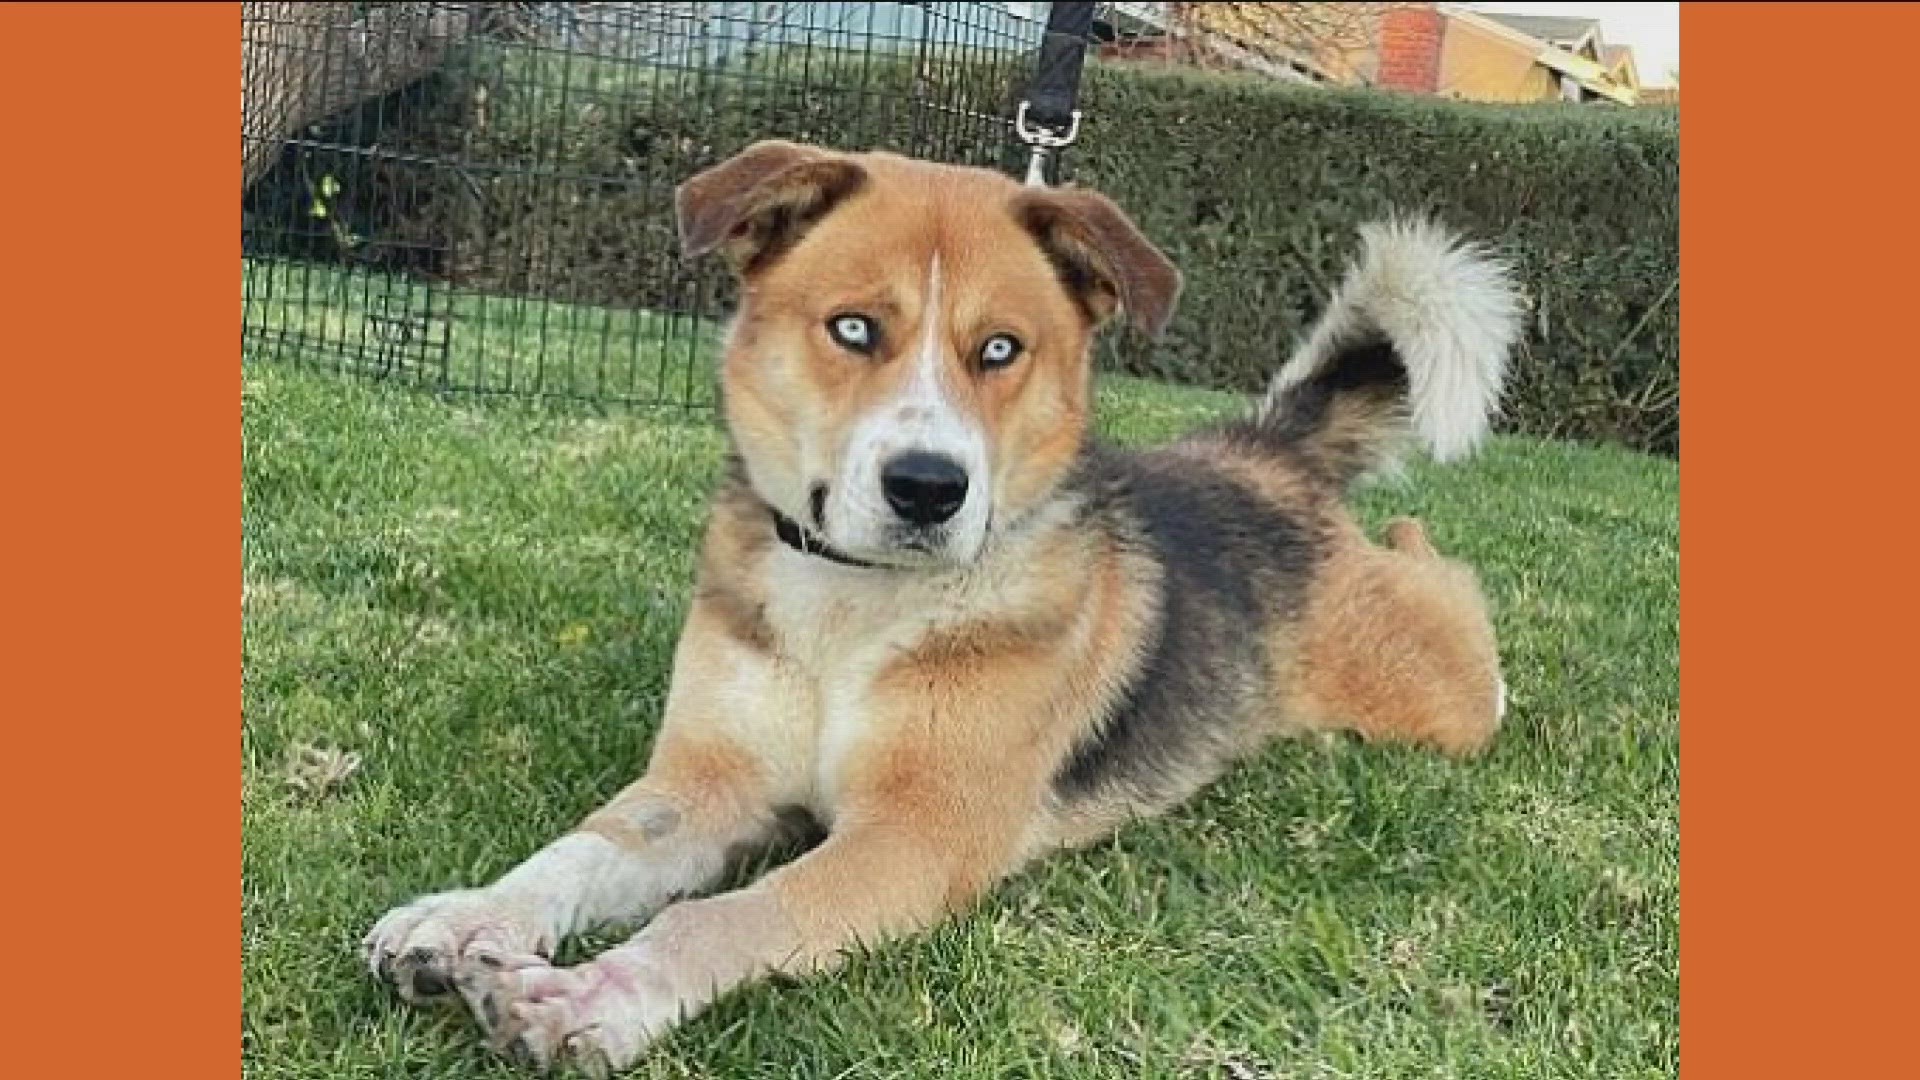 Sky is a one-year-old high energy and loves to roughhouse with other pups.  Sky would be perfect for an adventurous family that loves the outdoors.